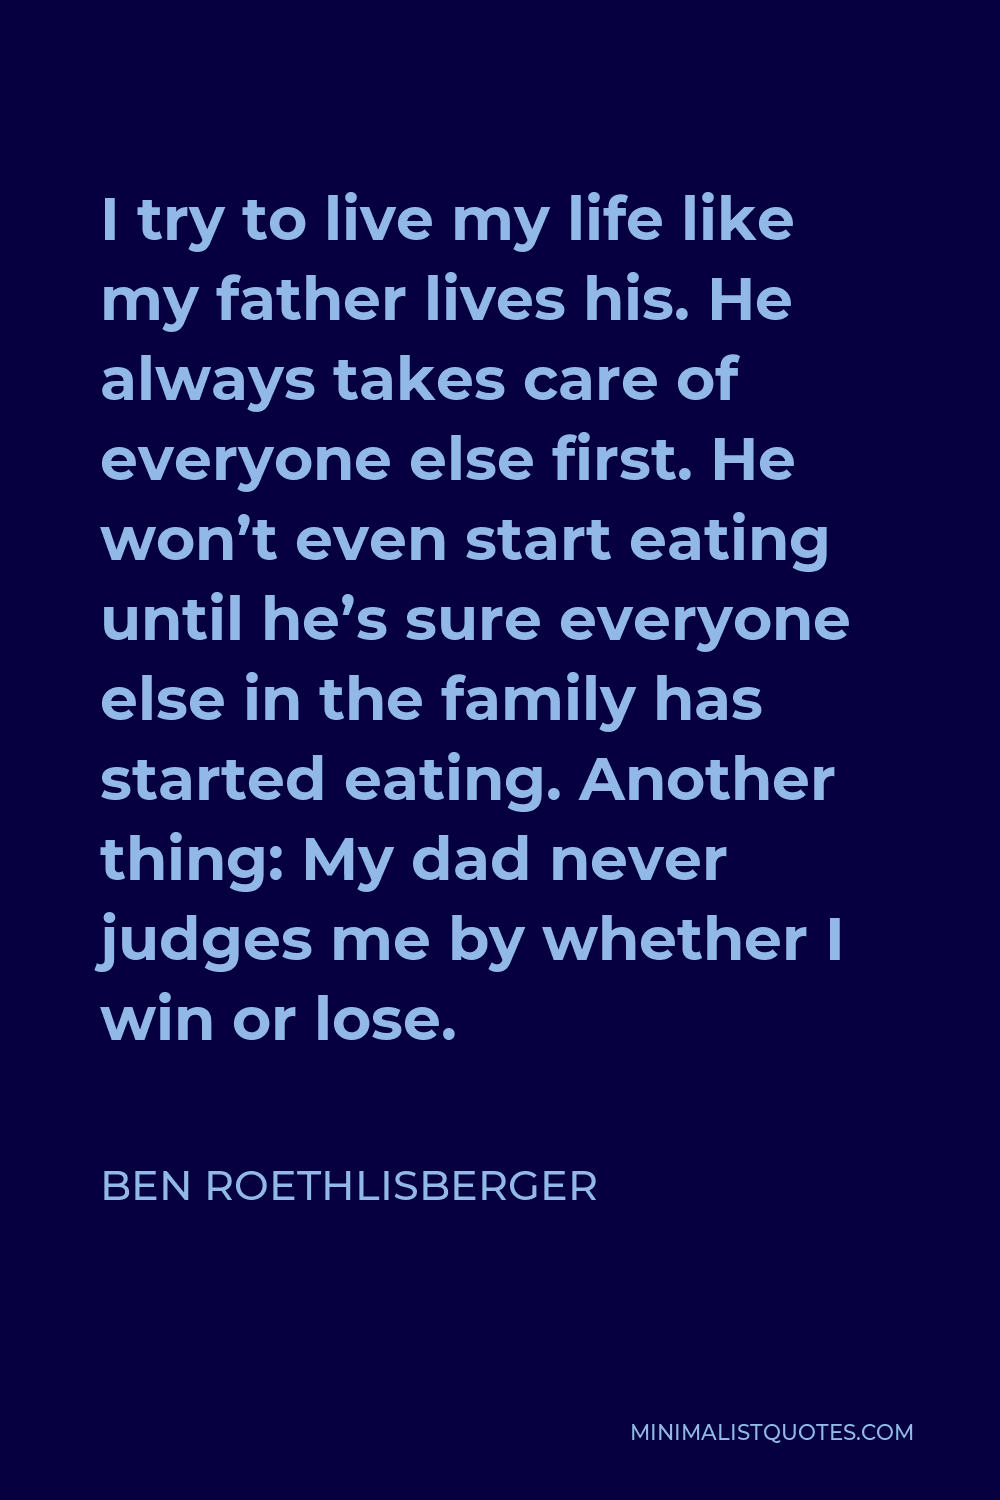 Ben Roethlisberger Quote - I try to live my life like my father lives his. He always takes care of everyone else first. He won’t even start eating until he’s sure everyone else in the family has started eating. Another thing: My dad never judges me by whether I win or lose.